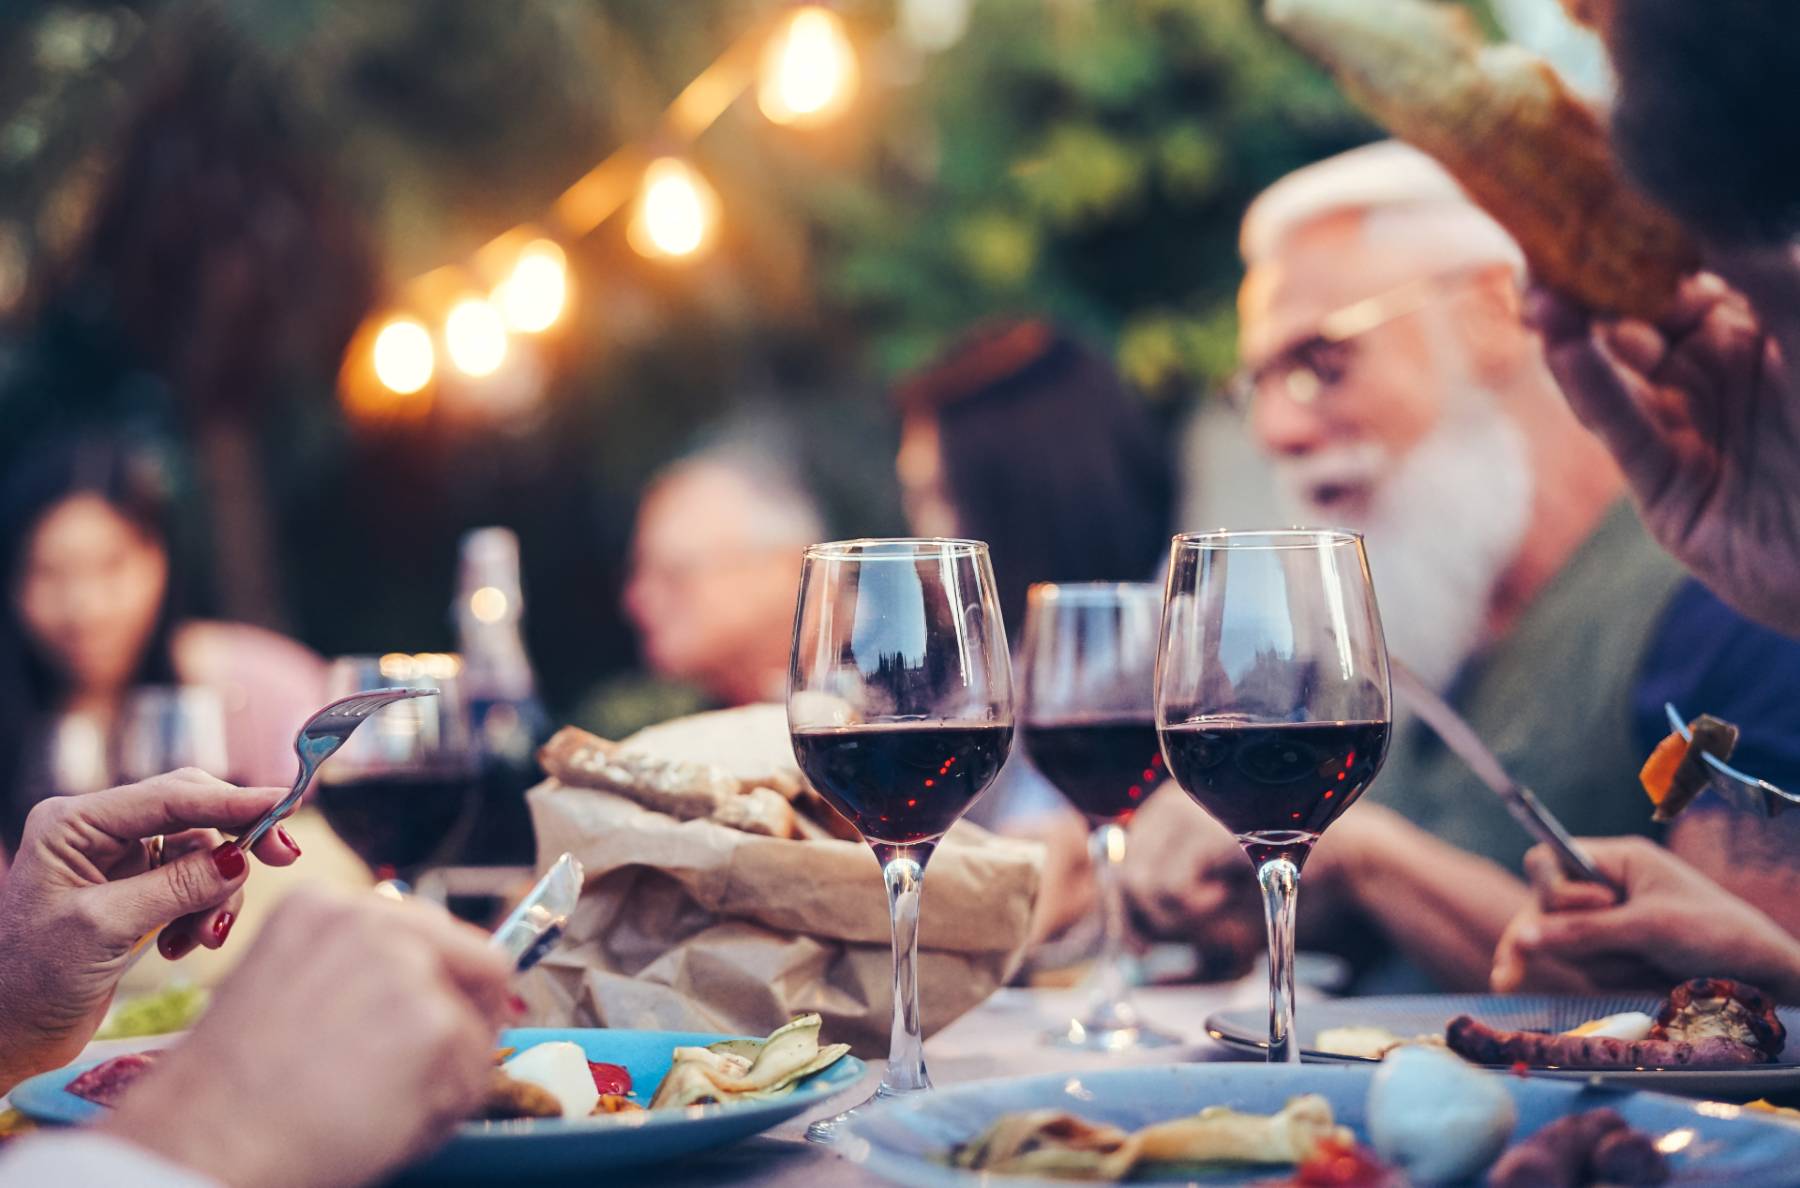 A group of people eat outside under string lights and drink red wine and eat a meal together